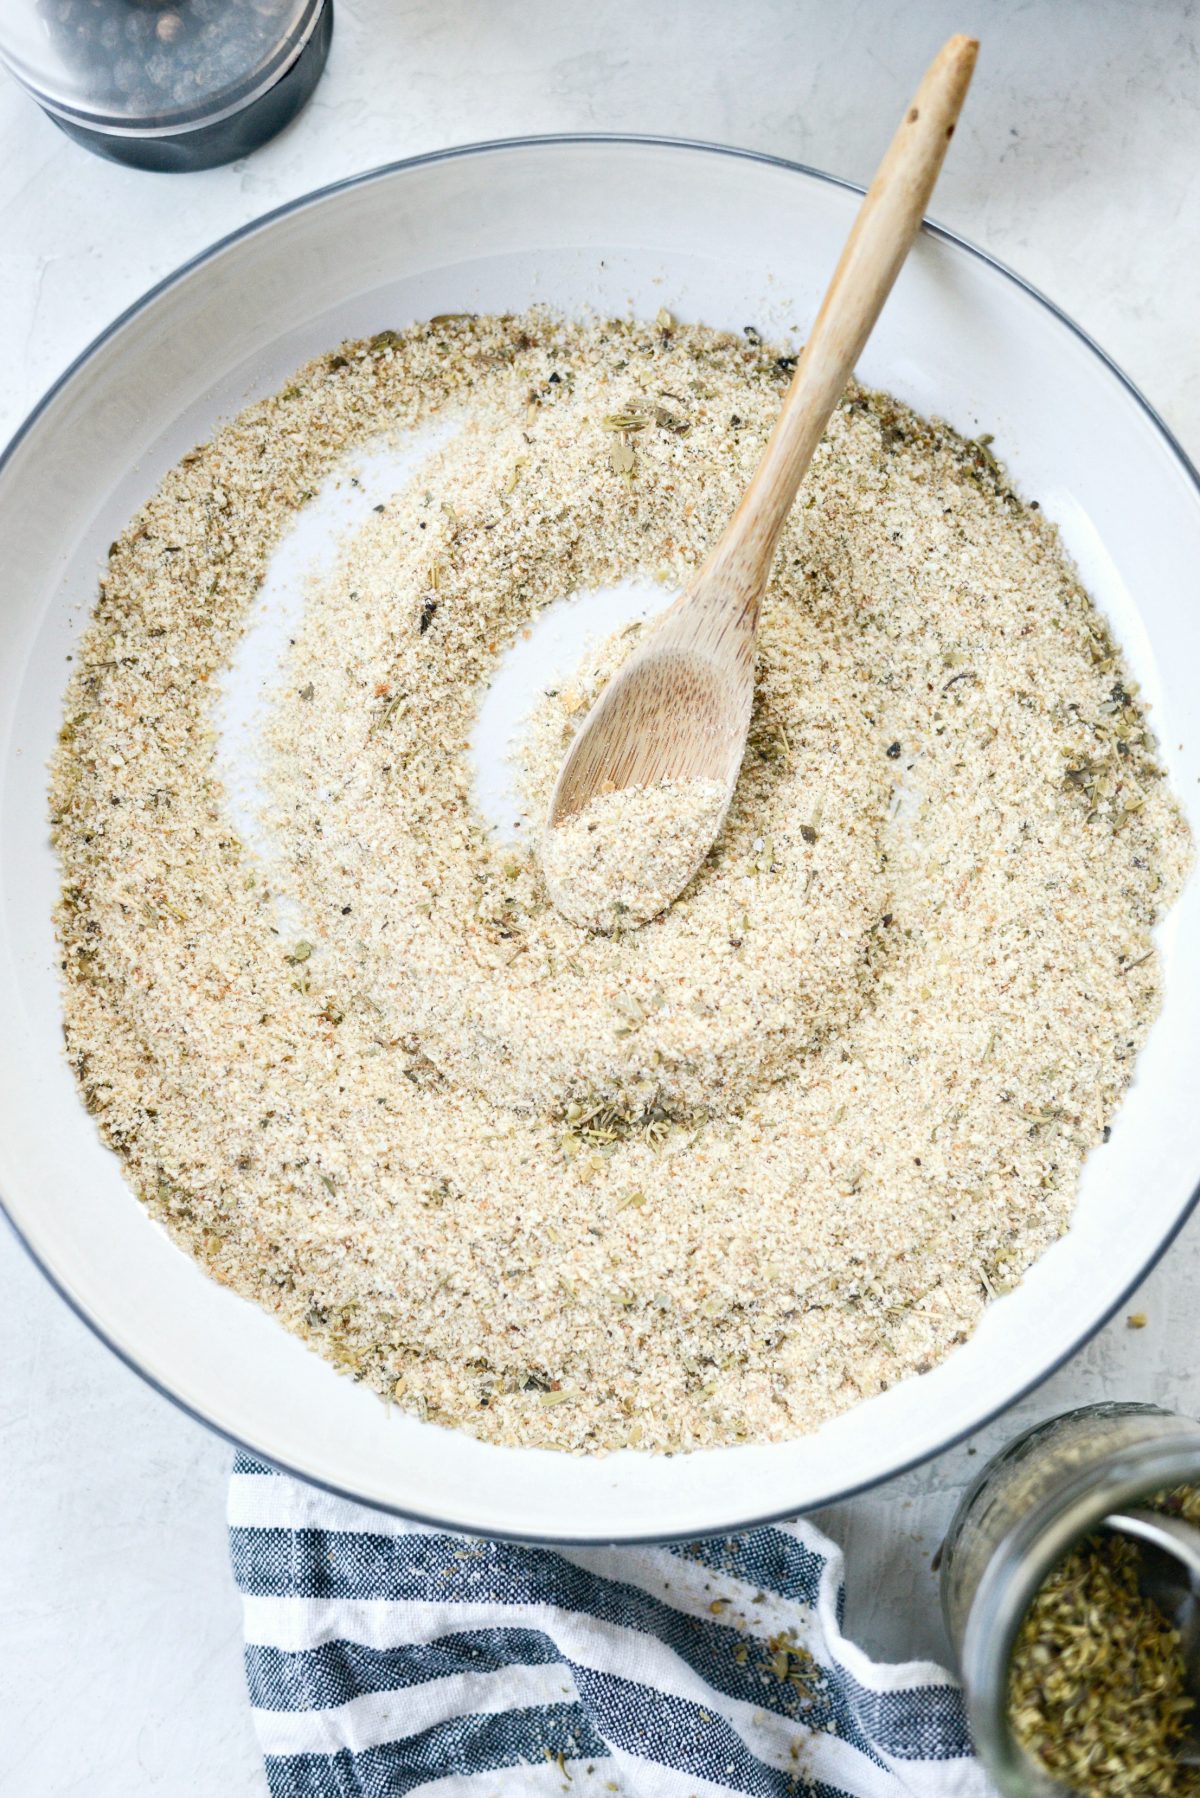 mix spices and panko